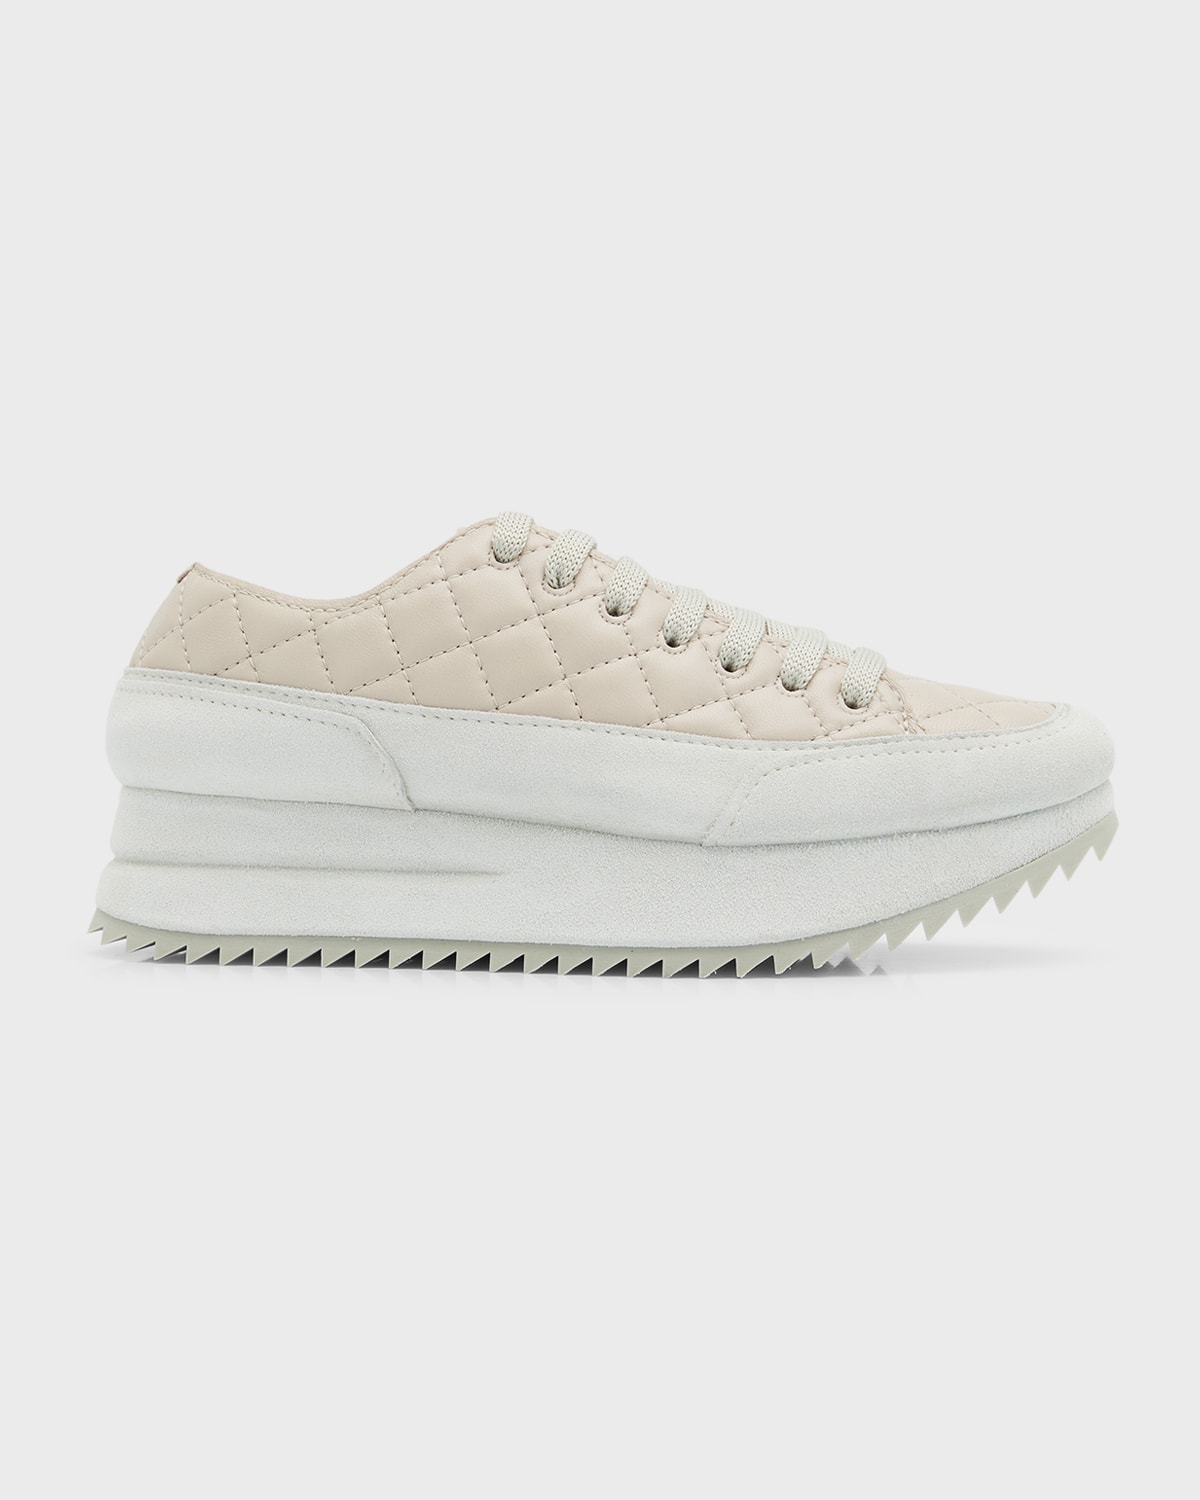 Pedro Garcia Quilted Leather Flatform Fashion Sneakers In Frappe Nappa